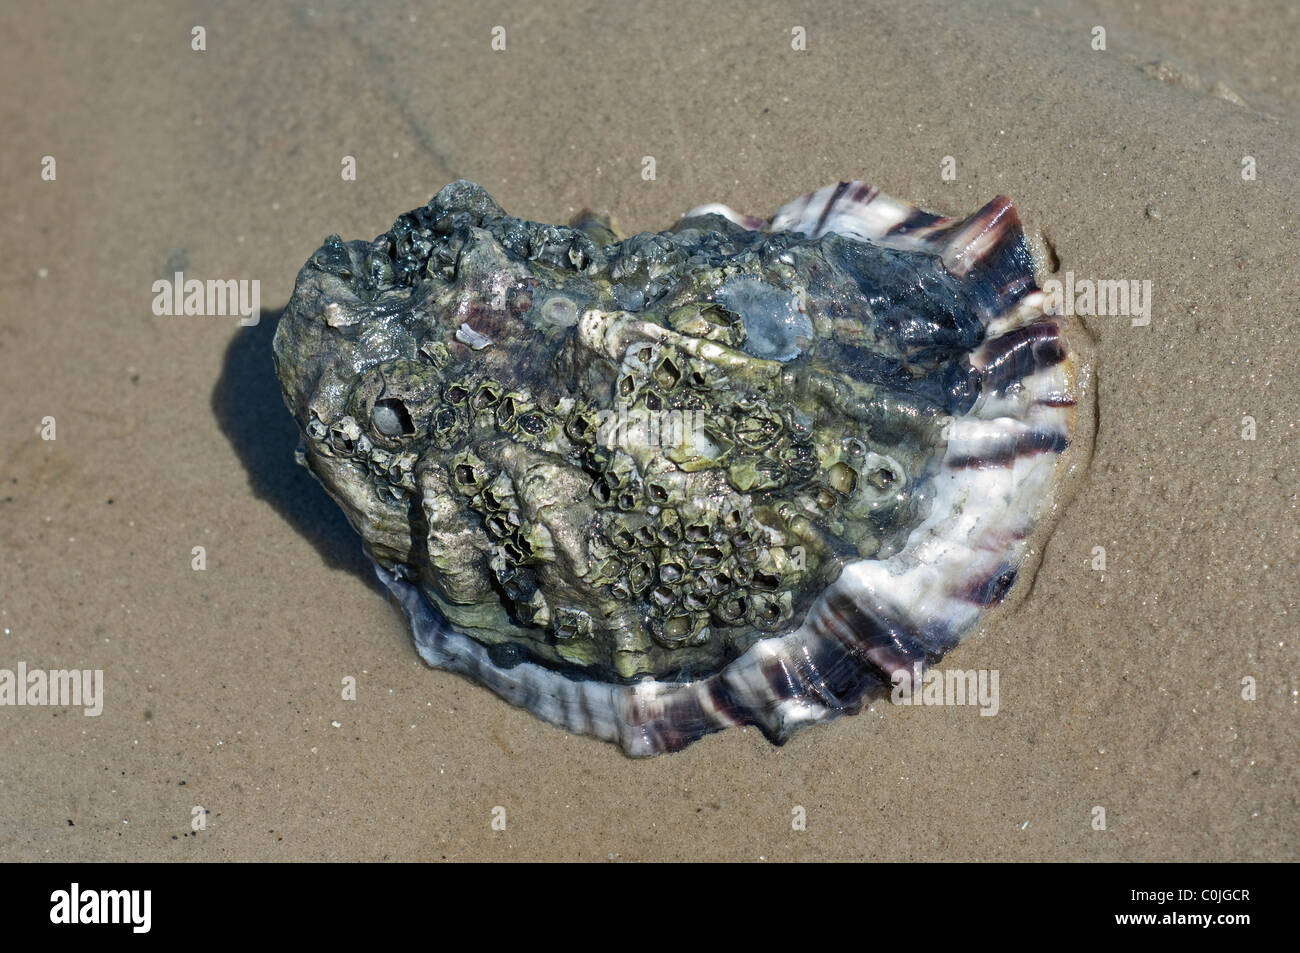 Common Oyster, Flat Oyster, European Flat Oyster (Ostrea edulis). Single individual covered with barnacles on sand. Stock Photo